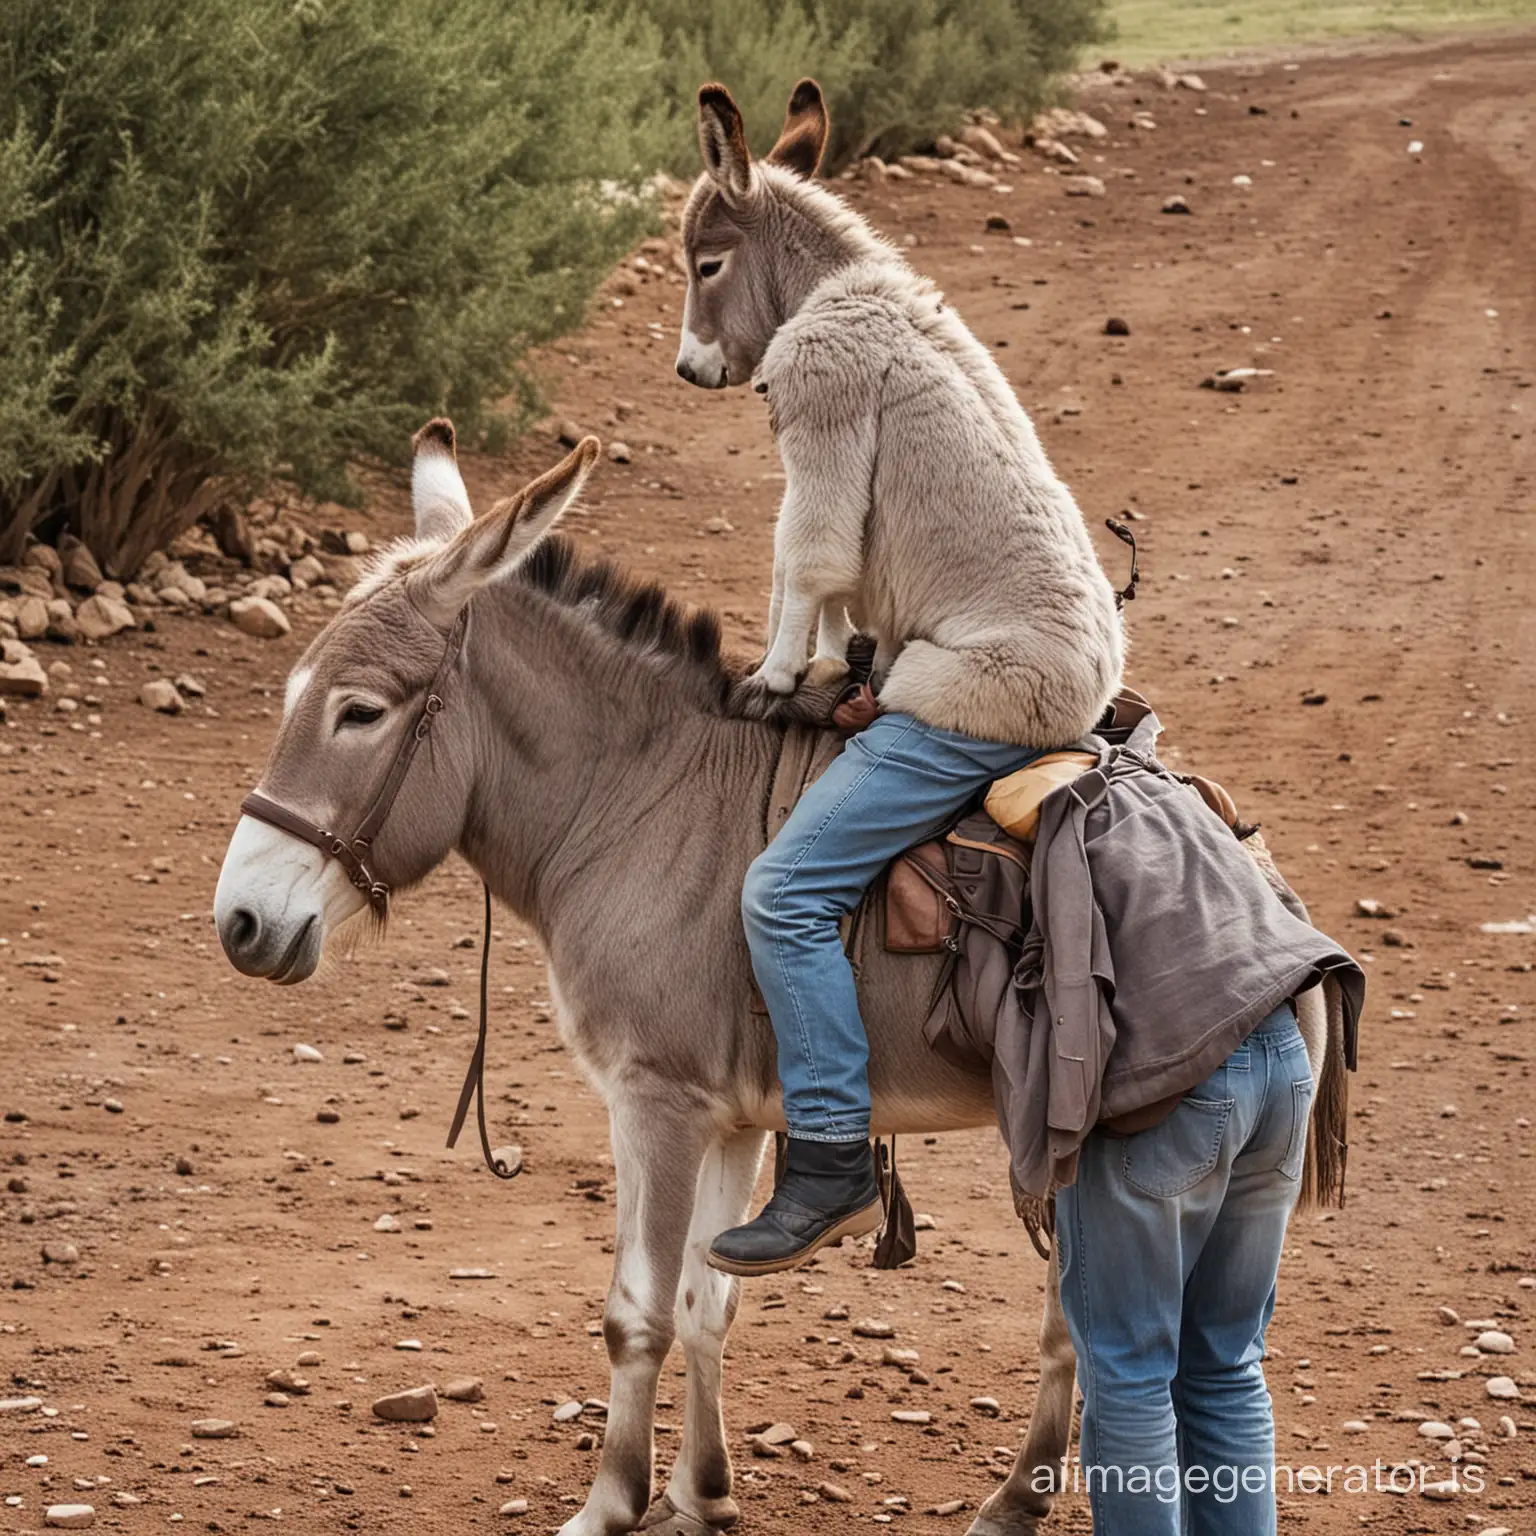 Man-with-Donkey-Seated-on-His-Back